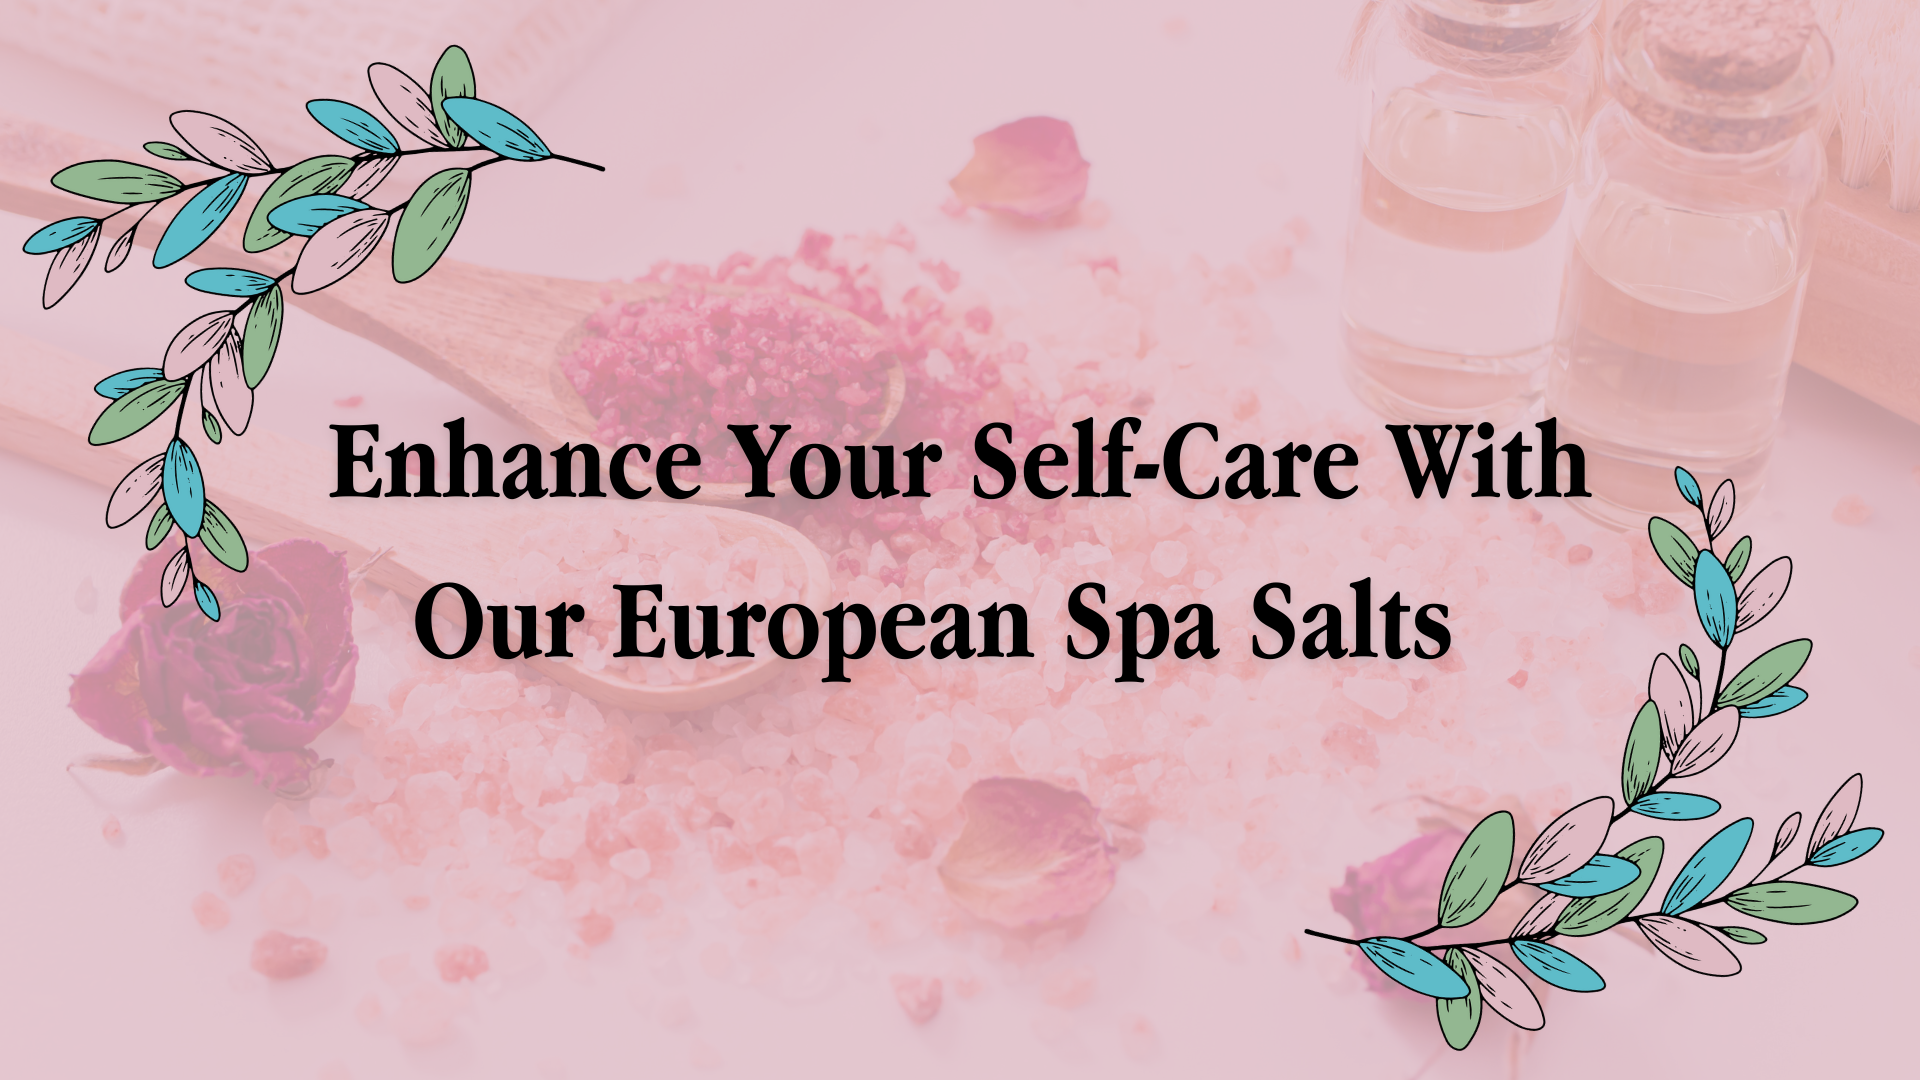 Enhance Your Self-Care With Our European Spa Salts!